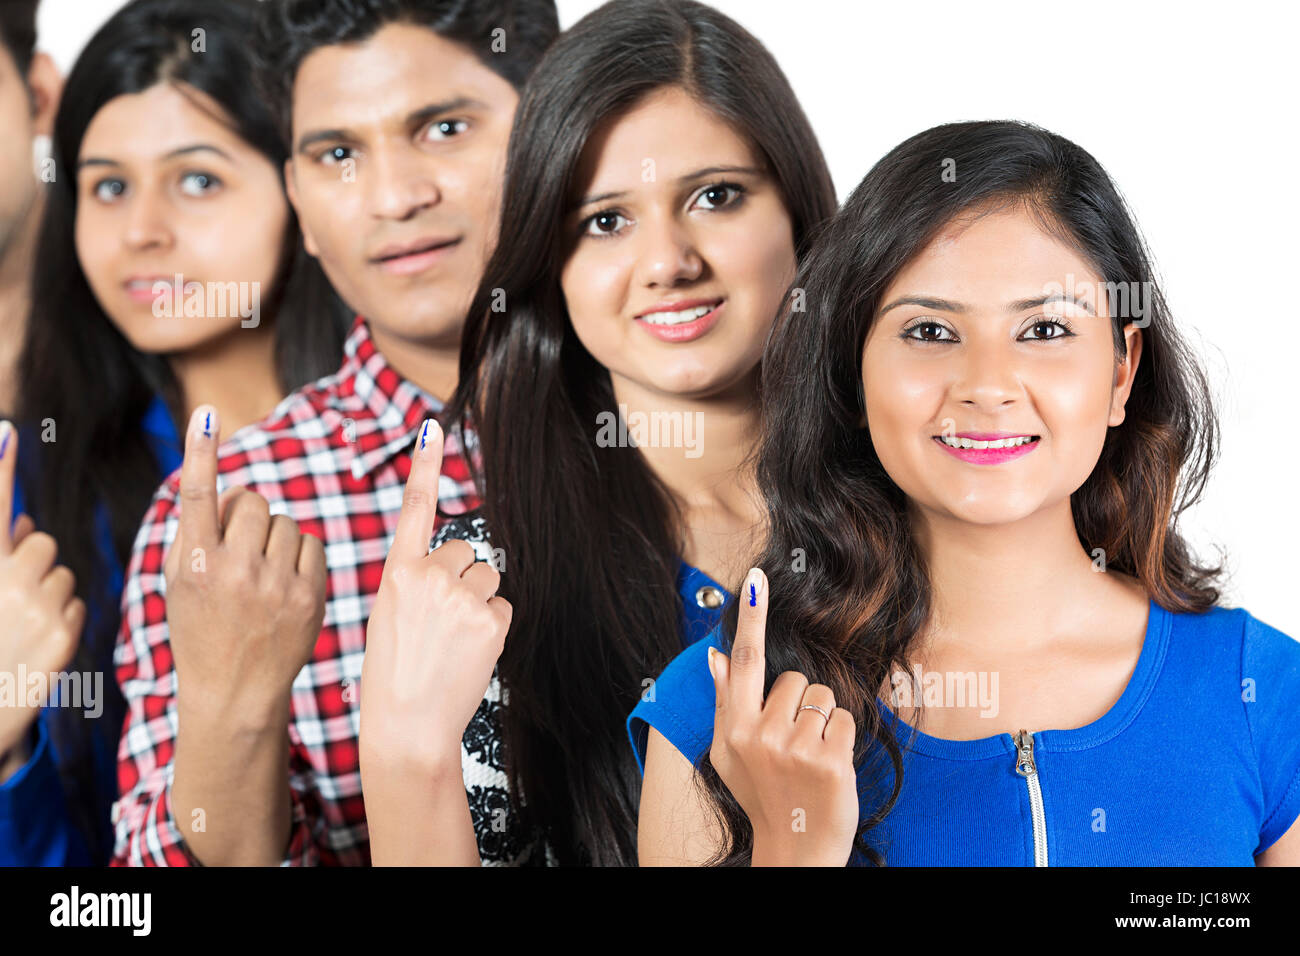 Election Finger Marking Showing Student Friends Voting Stock Photo